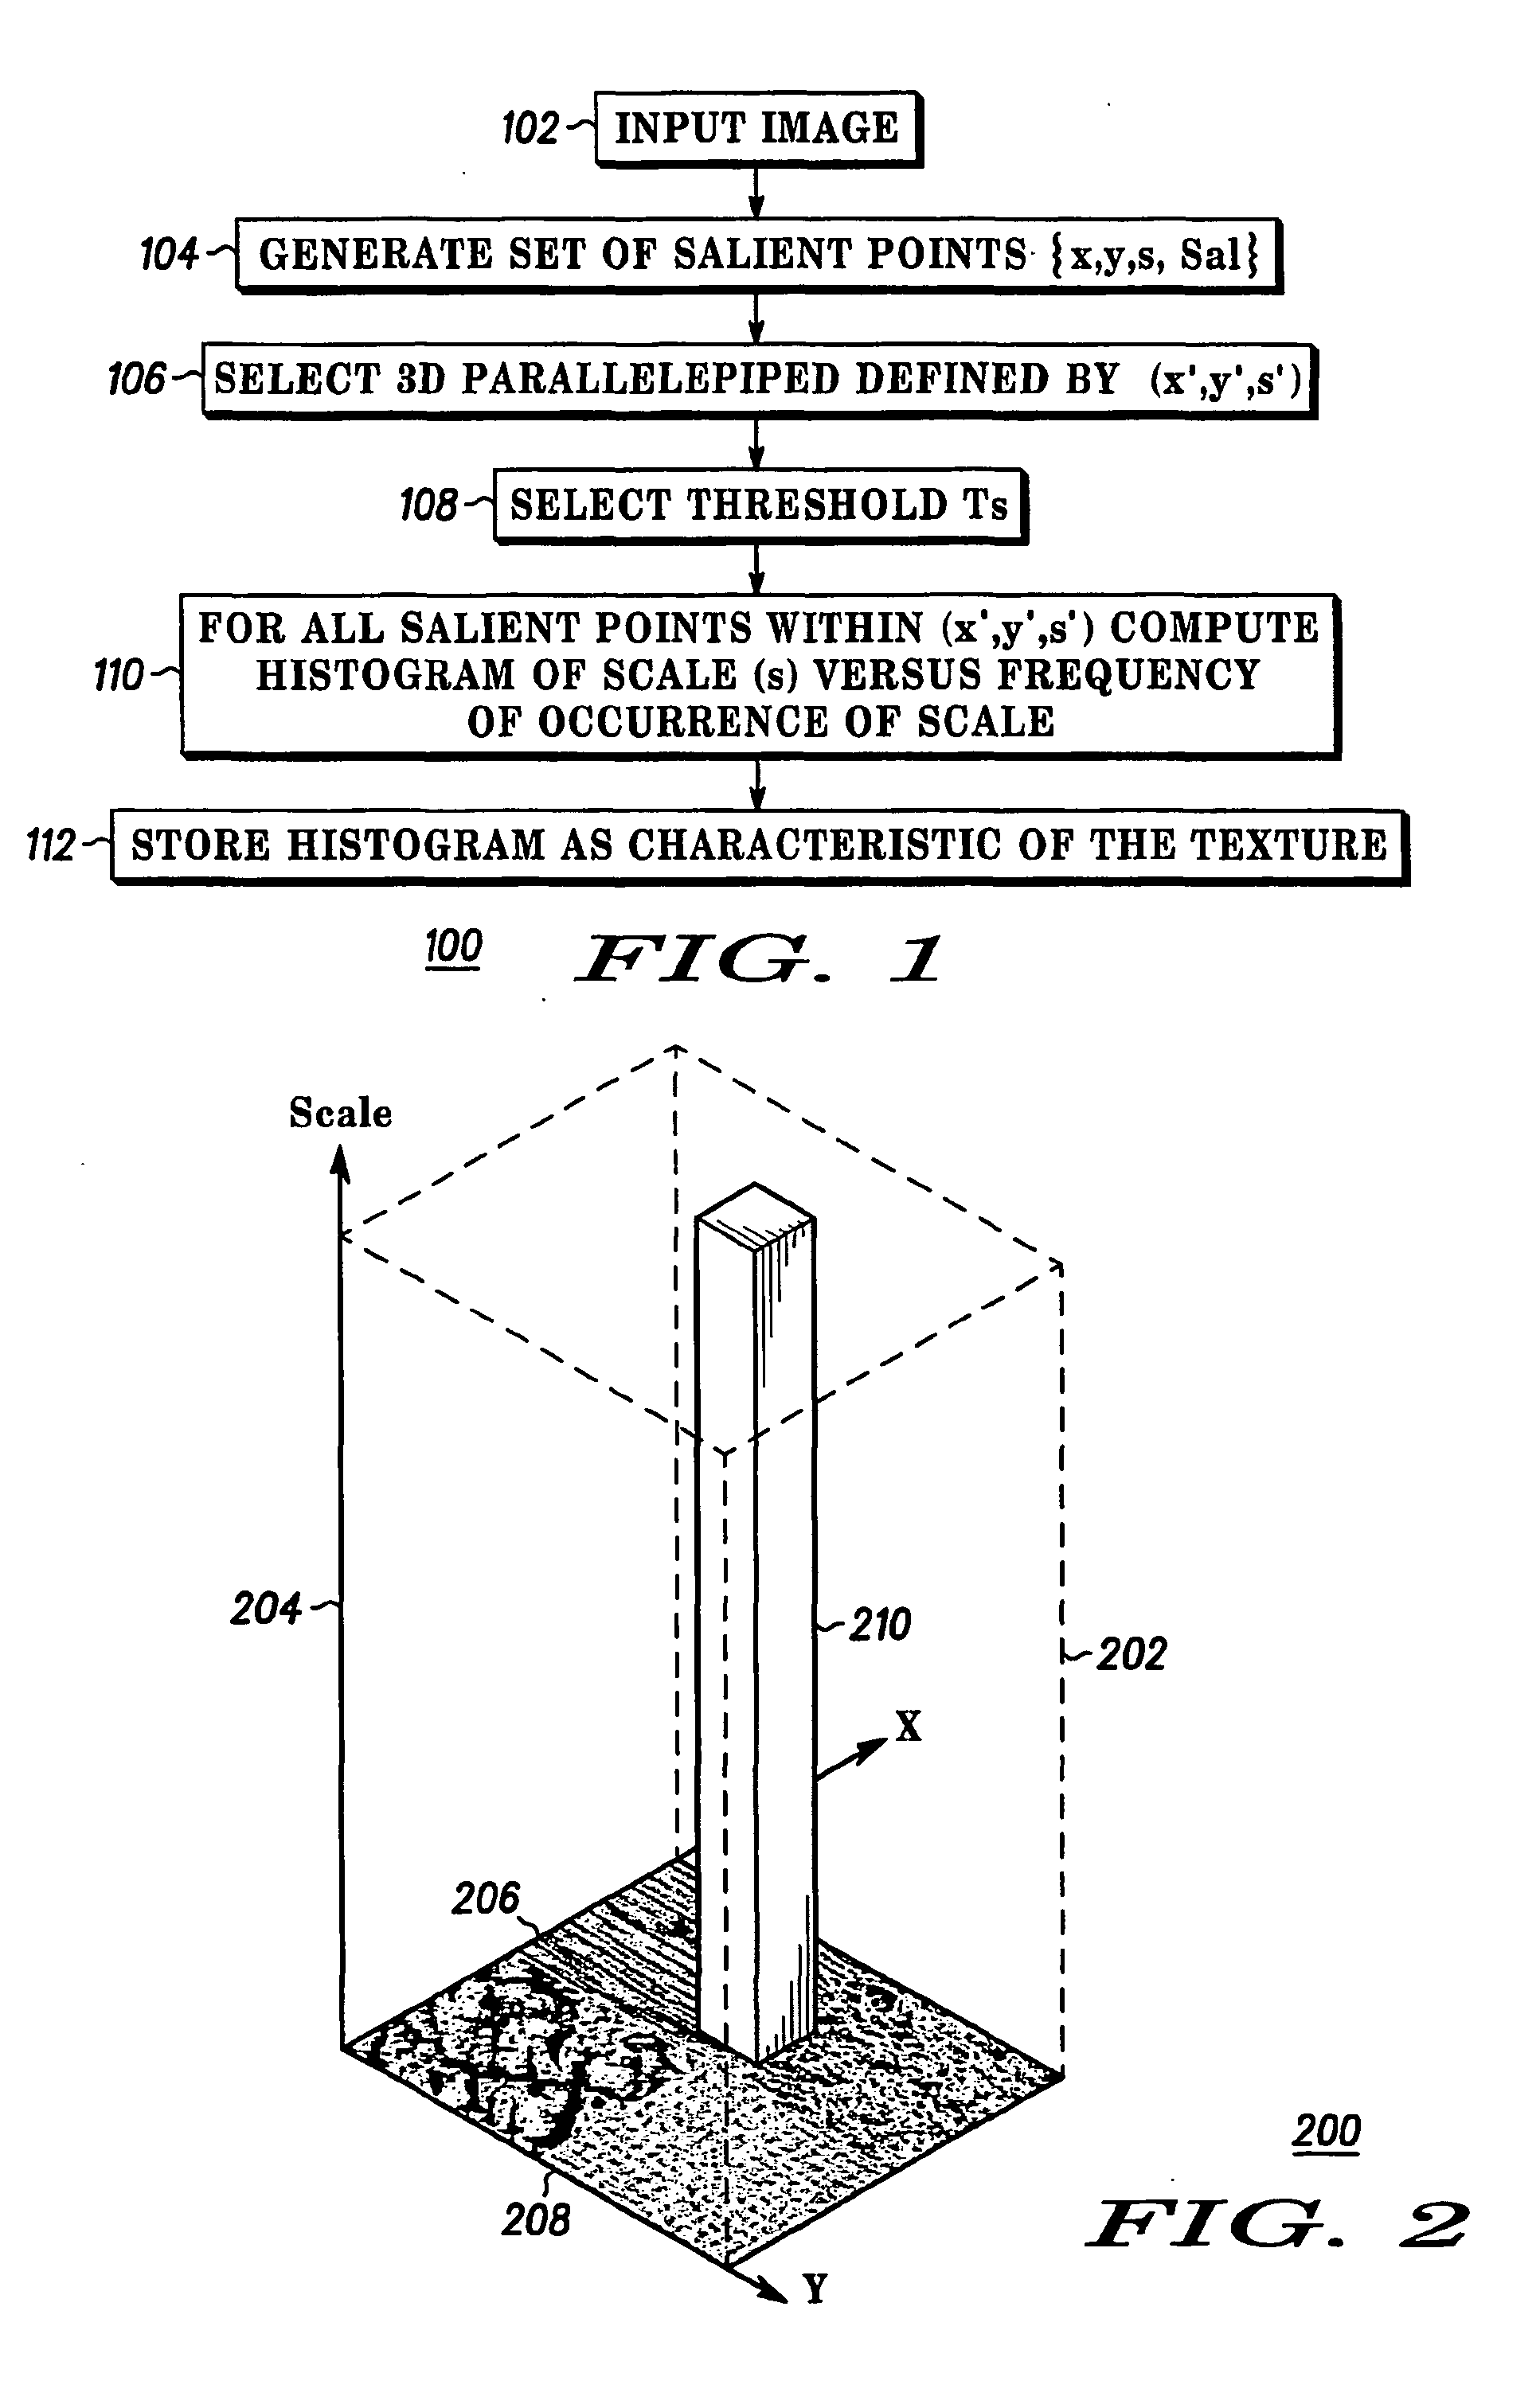 Image transmission system, image transmission unit and method for describing texture or a texture-like region